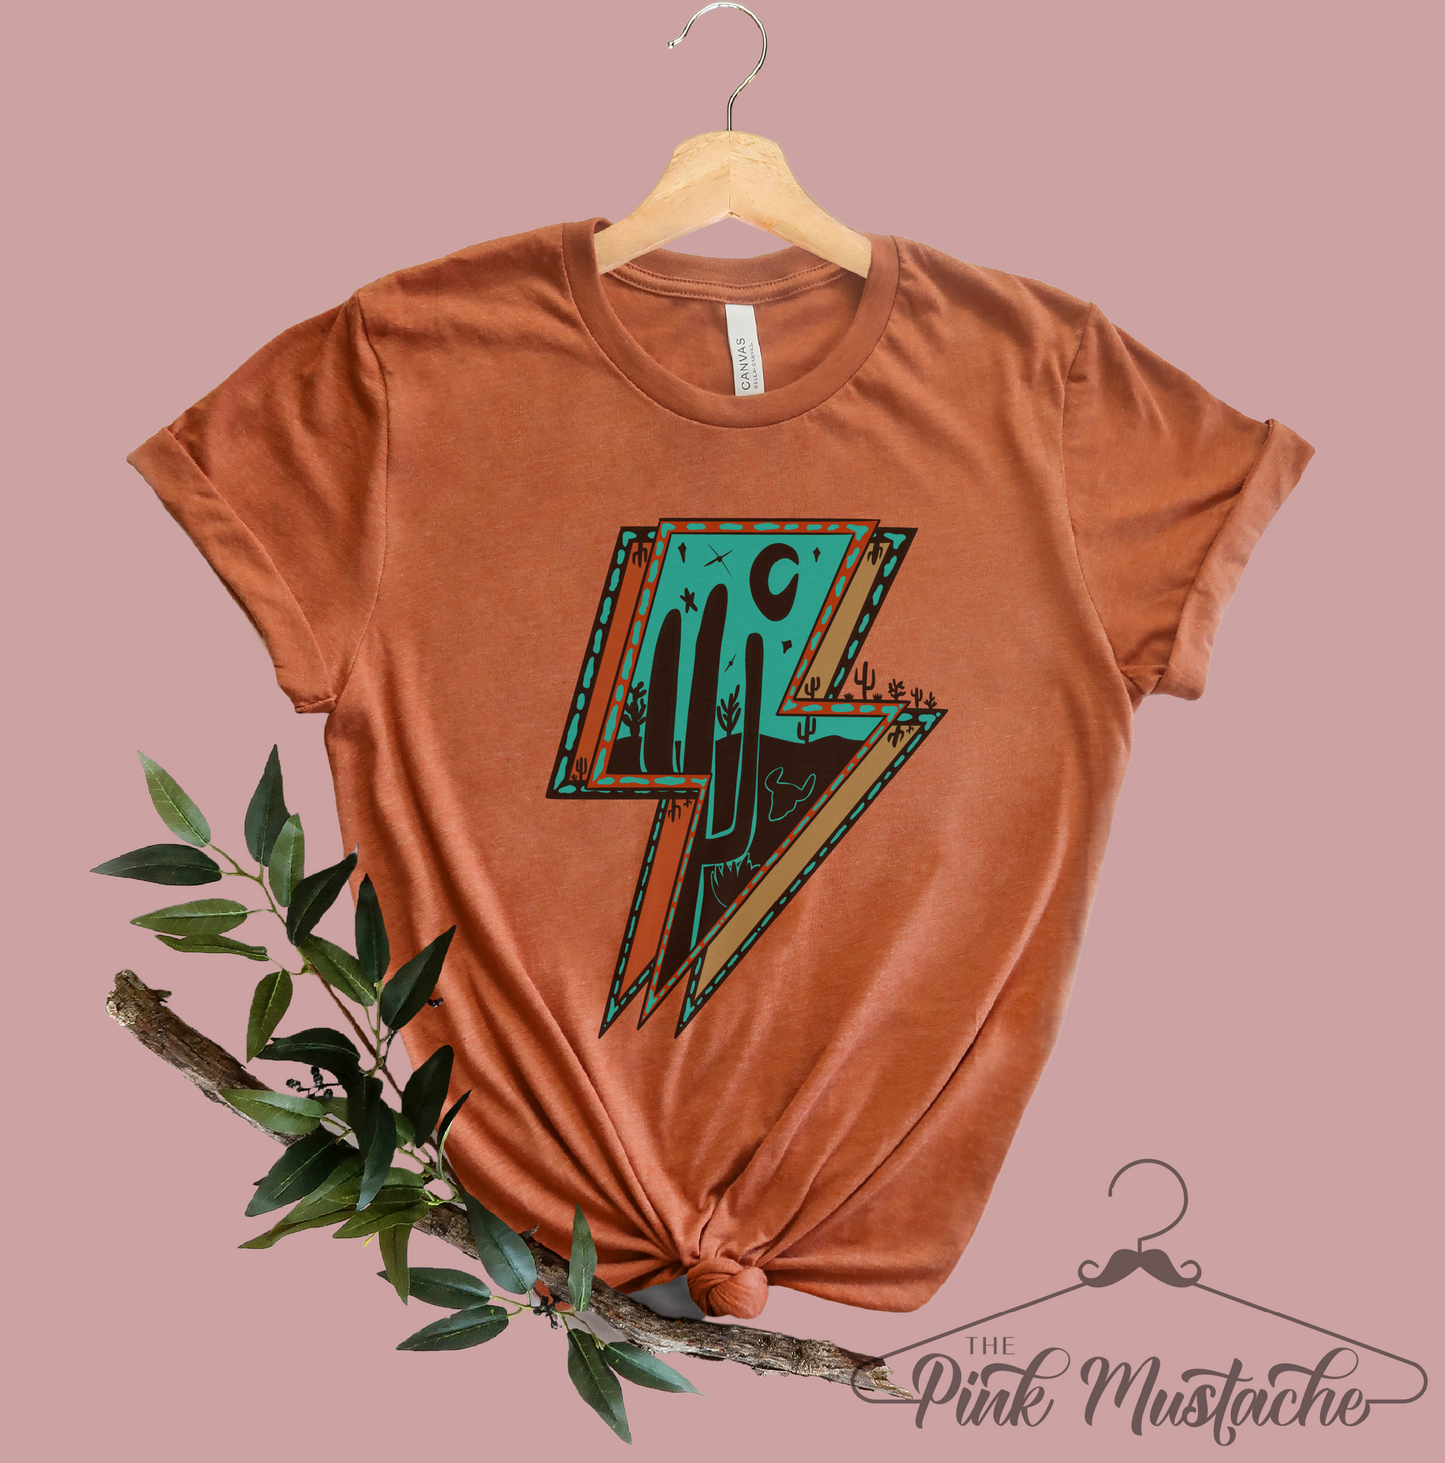 Western Lightning Cactus Soft Style Tee /Youth and Adult Sizes Available/ Country Western Unisex Softstyle T-Shirt